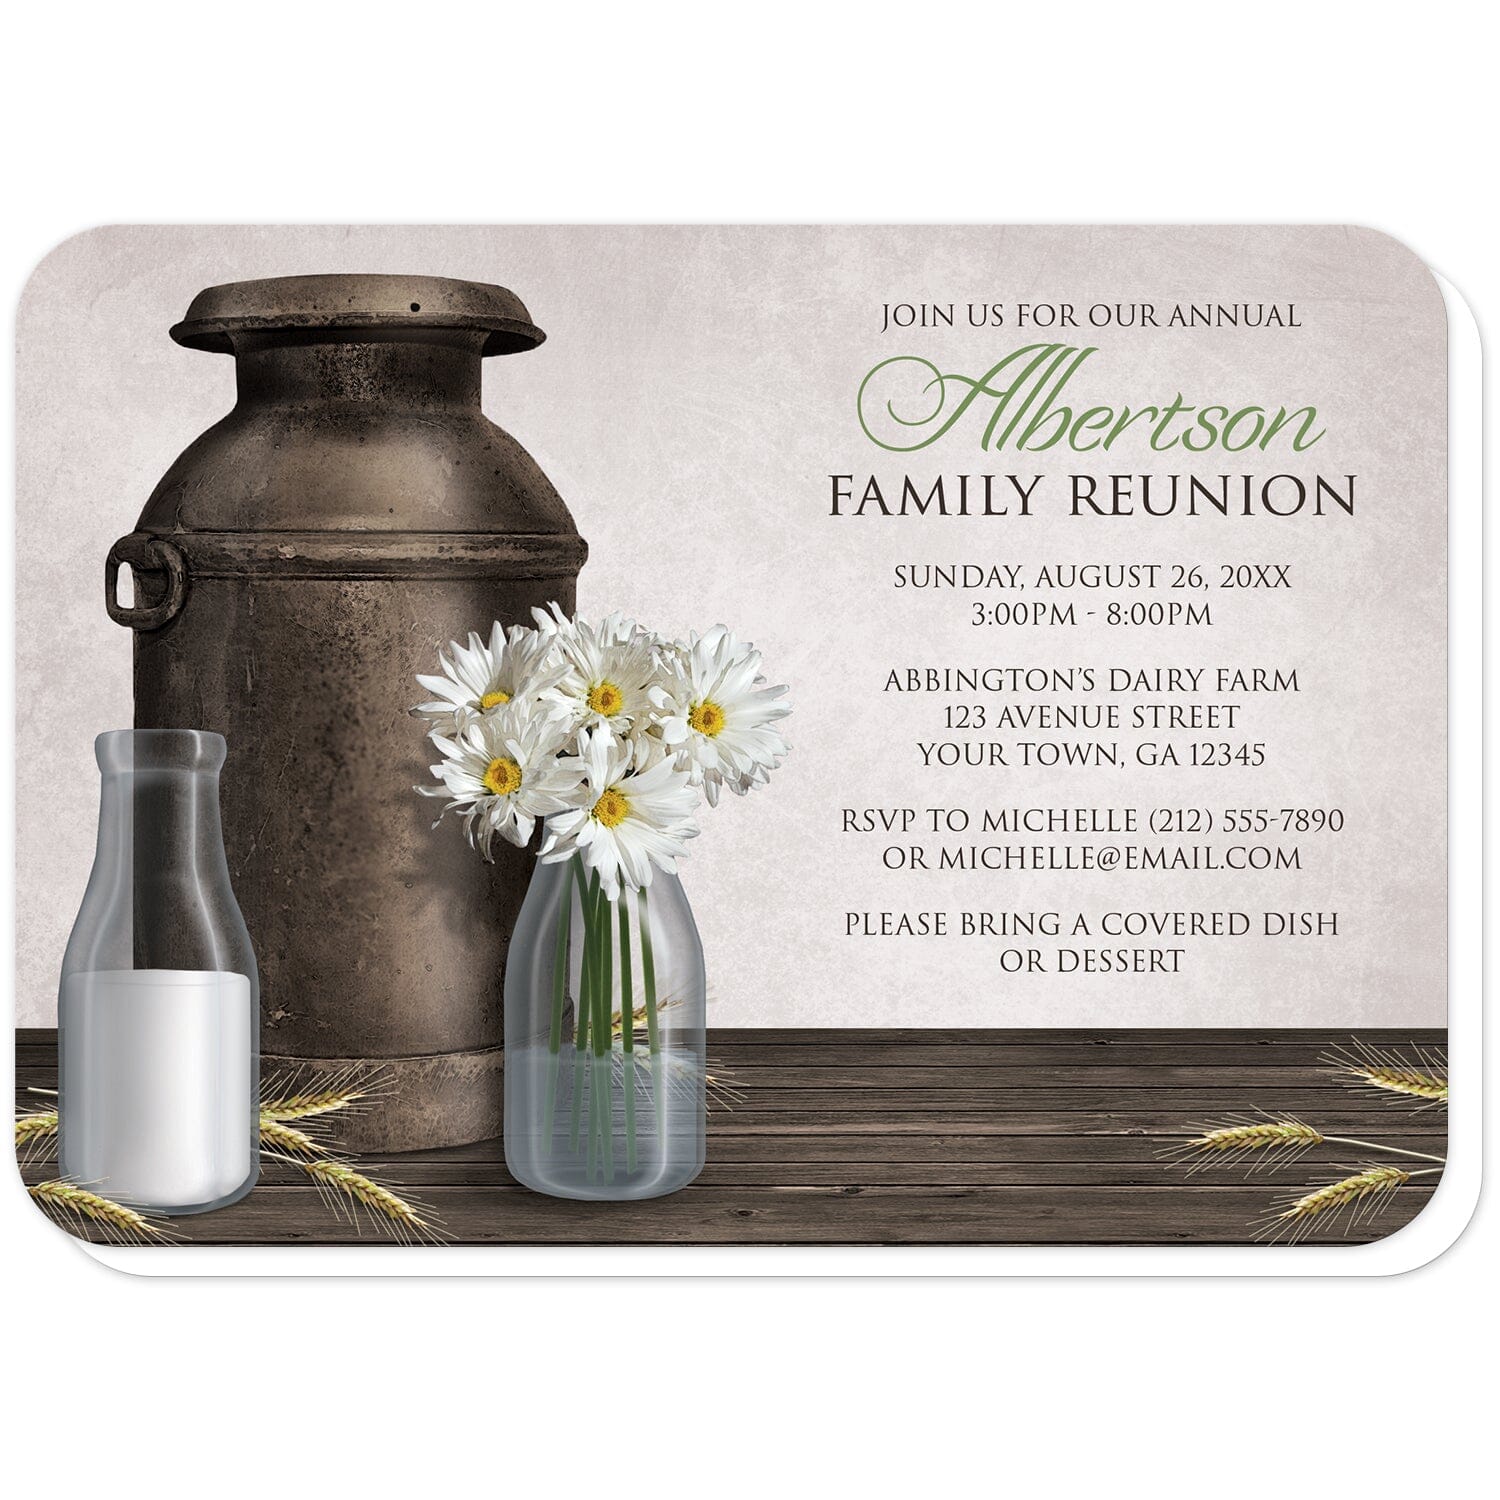 Rustic Country Dairy Farm Family Reunion Invitations (with rounded corners) at Artistically Invited. Rustic country dairy farm family reunion invitations with an illustration of an antique milk can, two milk bottles (one with milk, the other with white daisies and water) on a dark wood tabletop with hay stems. Your personalized reunion event details are custom printed in brown and green over a light parchment-colored background.